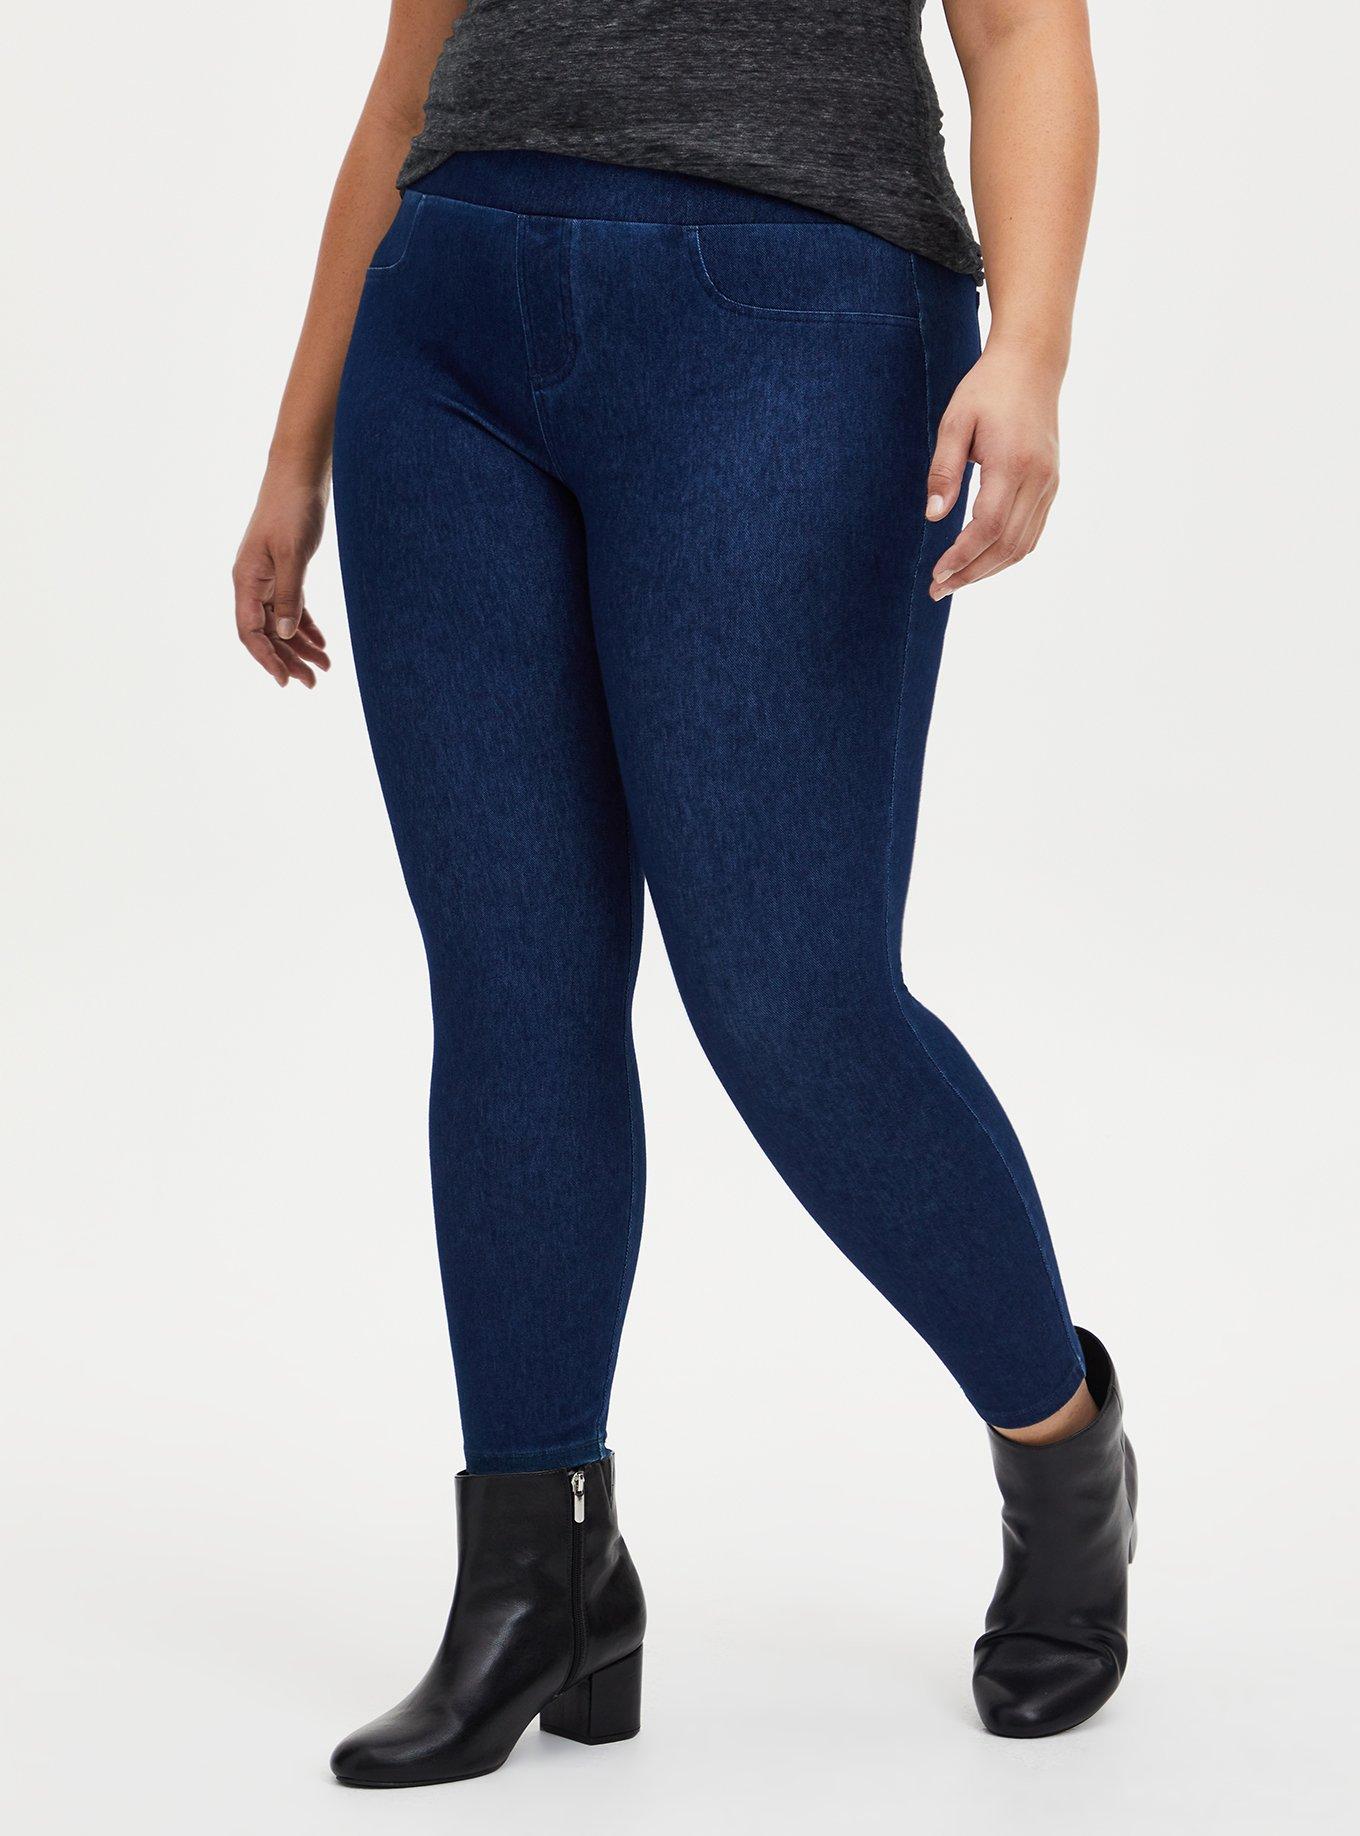 NWT No Nonsense Pull On Classic Denim Leggings - $10 New With Tags - From  Mallory